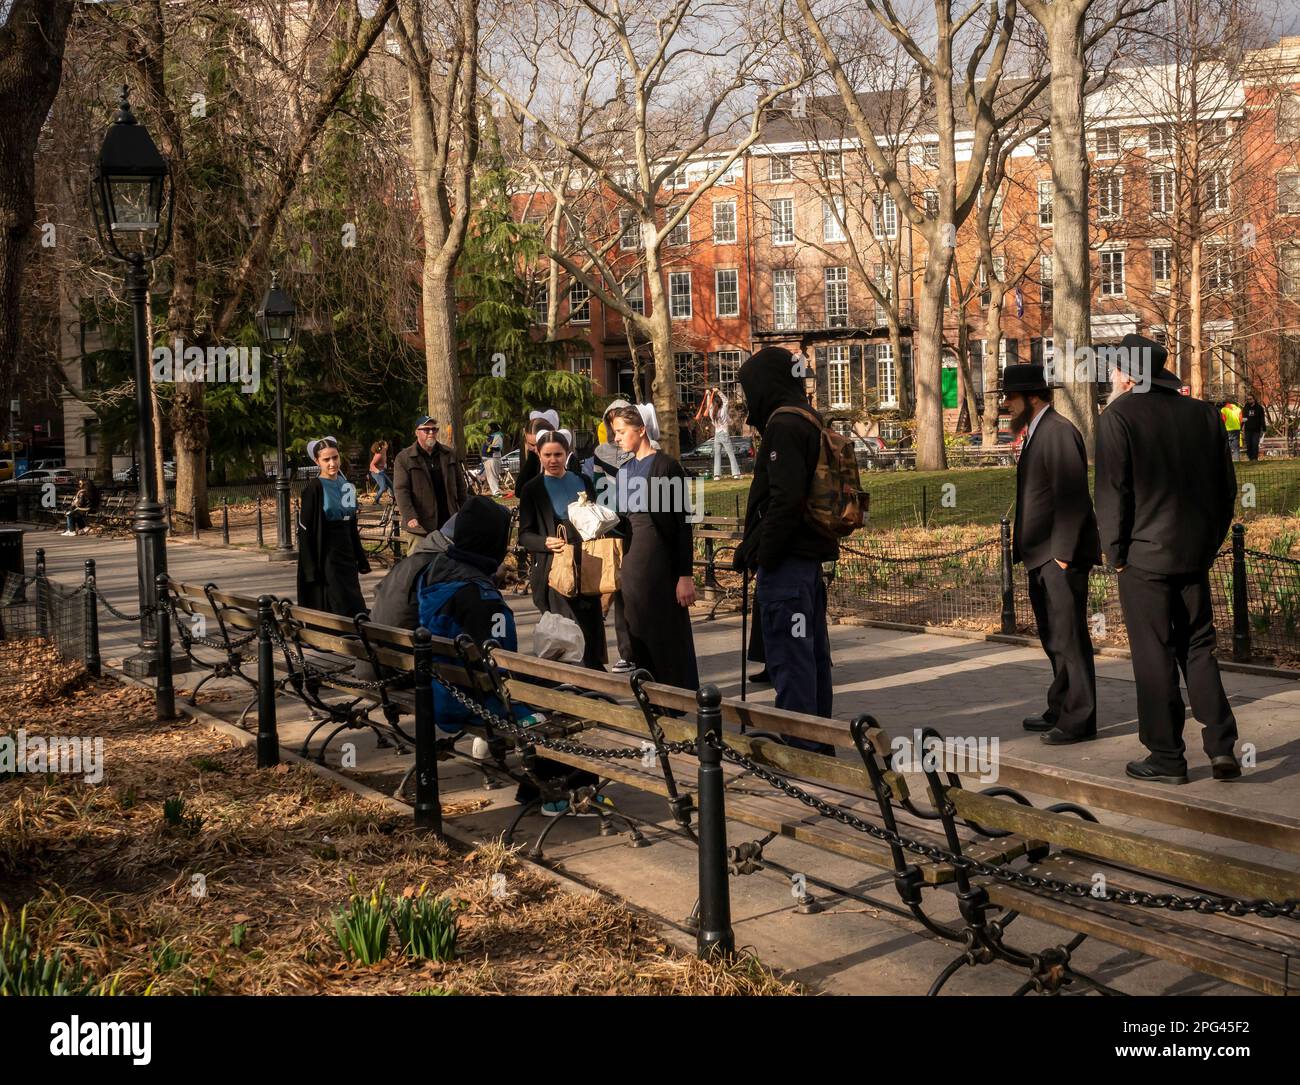 Members of the Mennonite religion visit the Washington Square Park in Greenwich Village of New York on Saturday, March 11, 2023. (© Richard B. Levine) Stock Photo